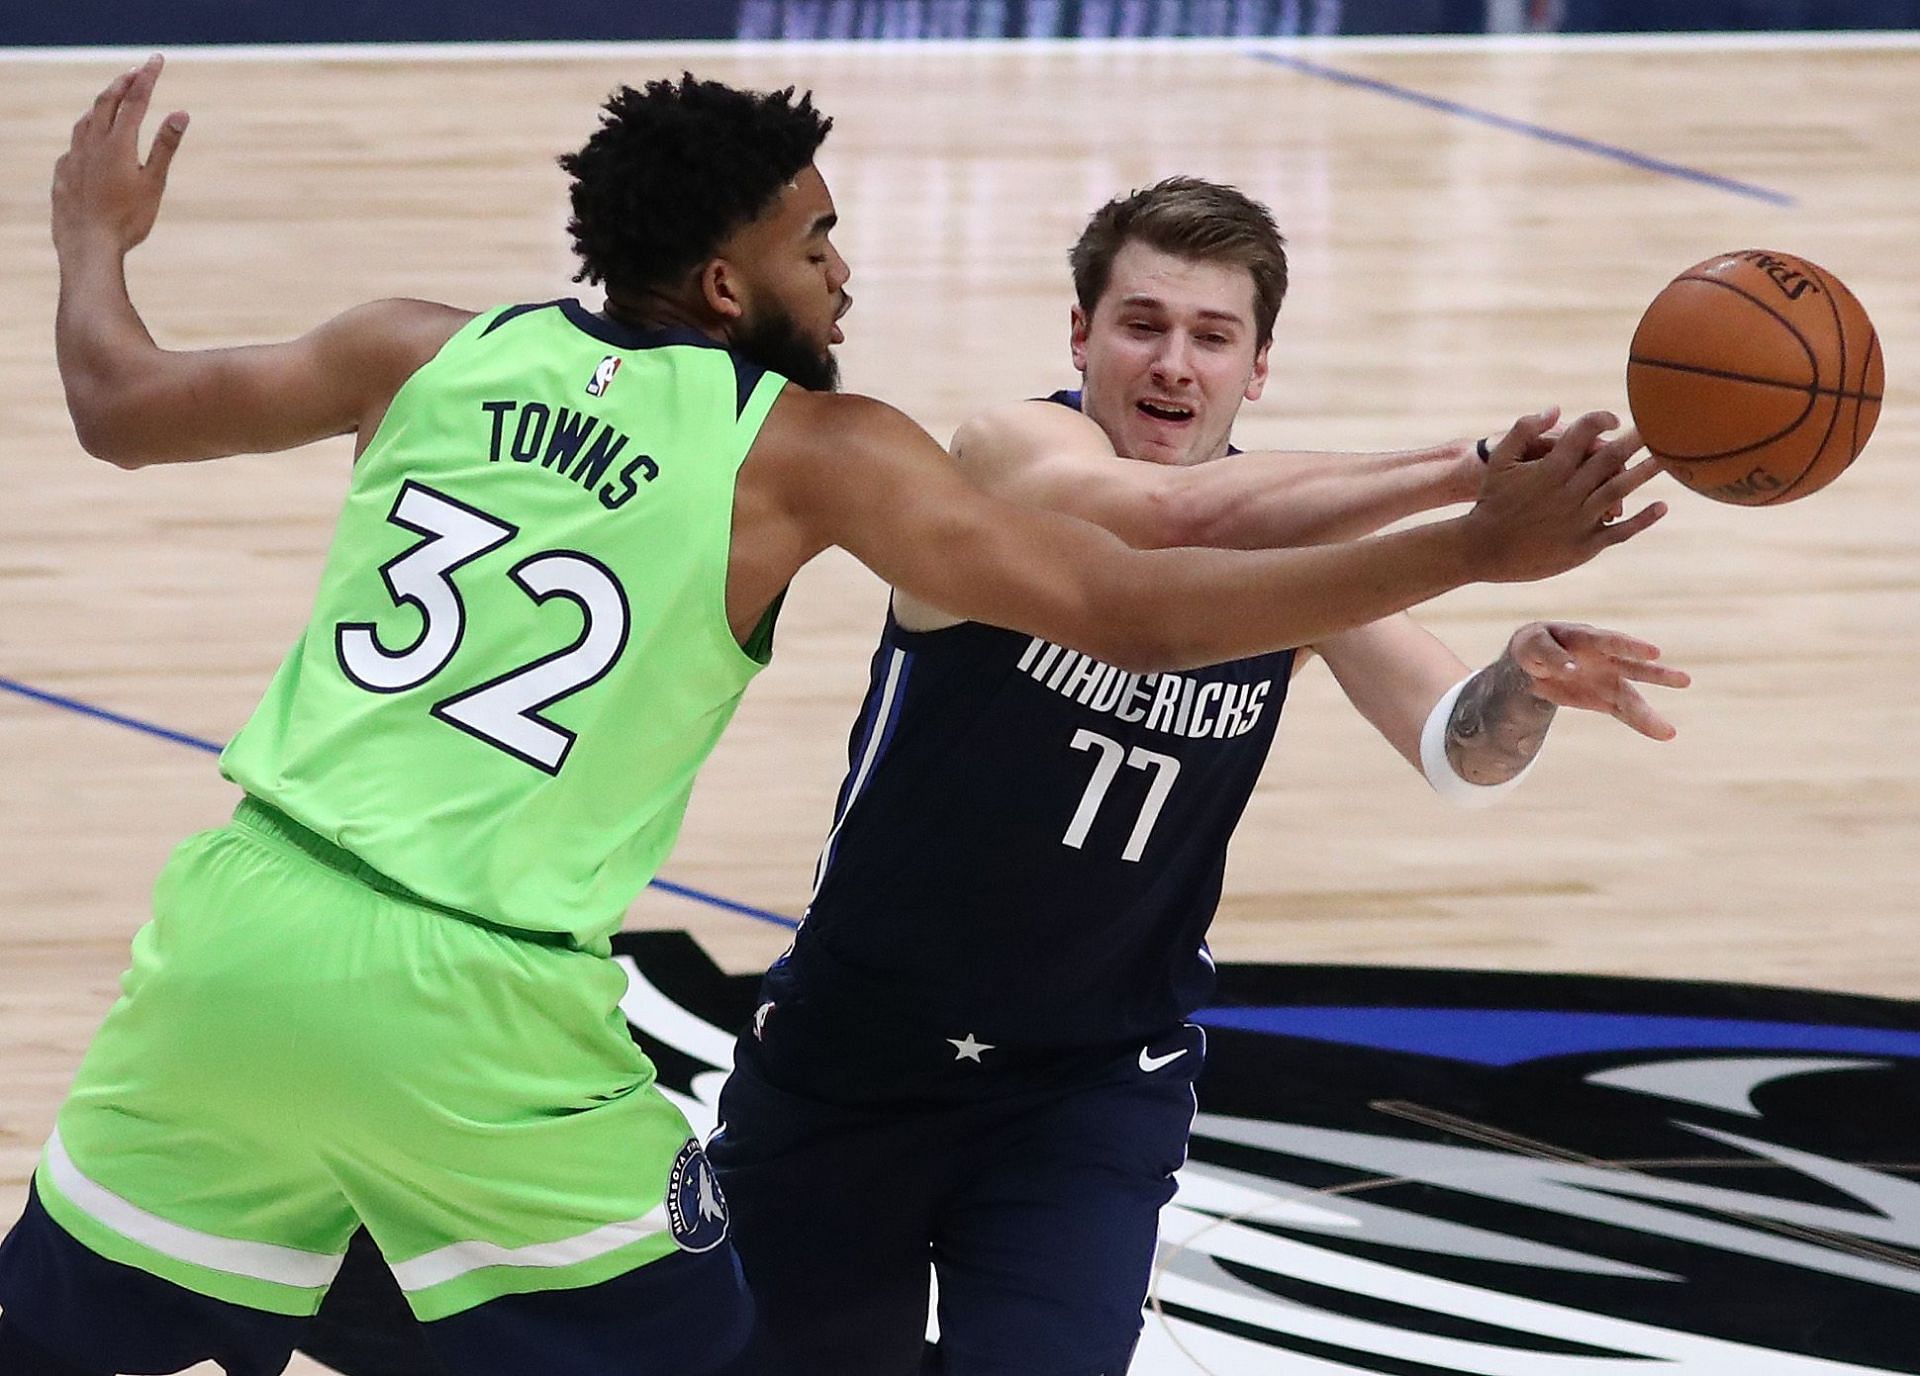 Luka Doncic of the Dallas Mavericks against Karl-Anthony Towns of the Minnesota Timberwolves